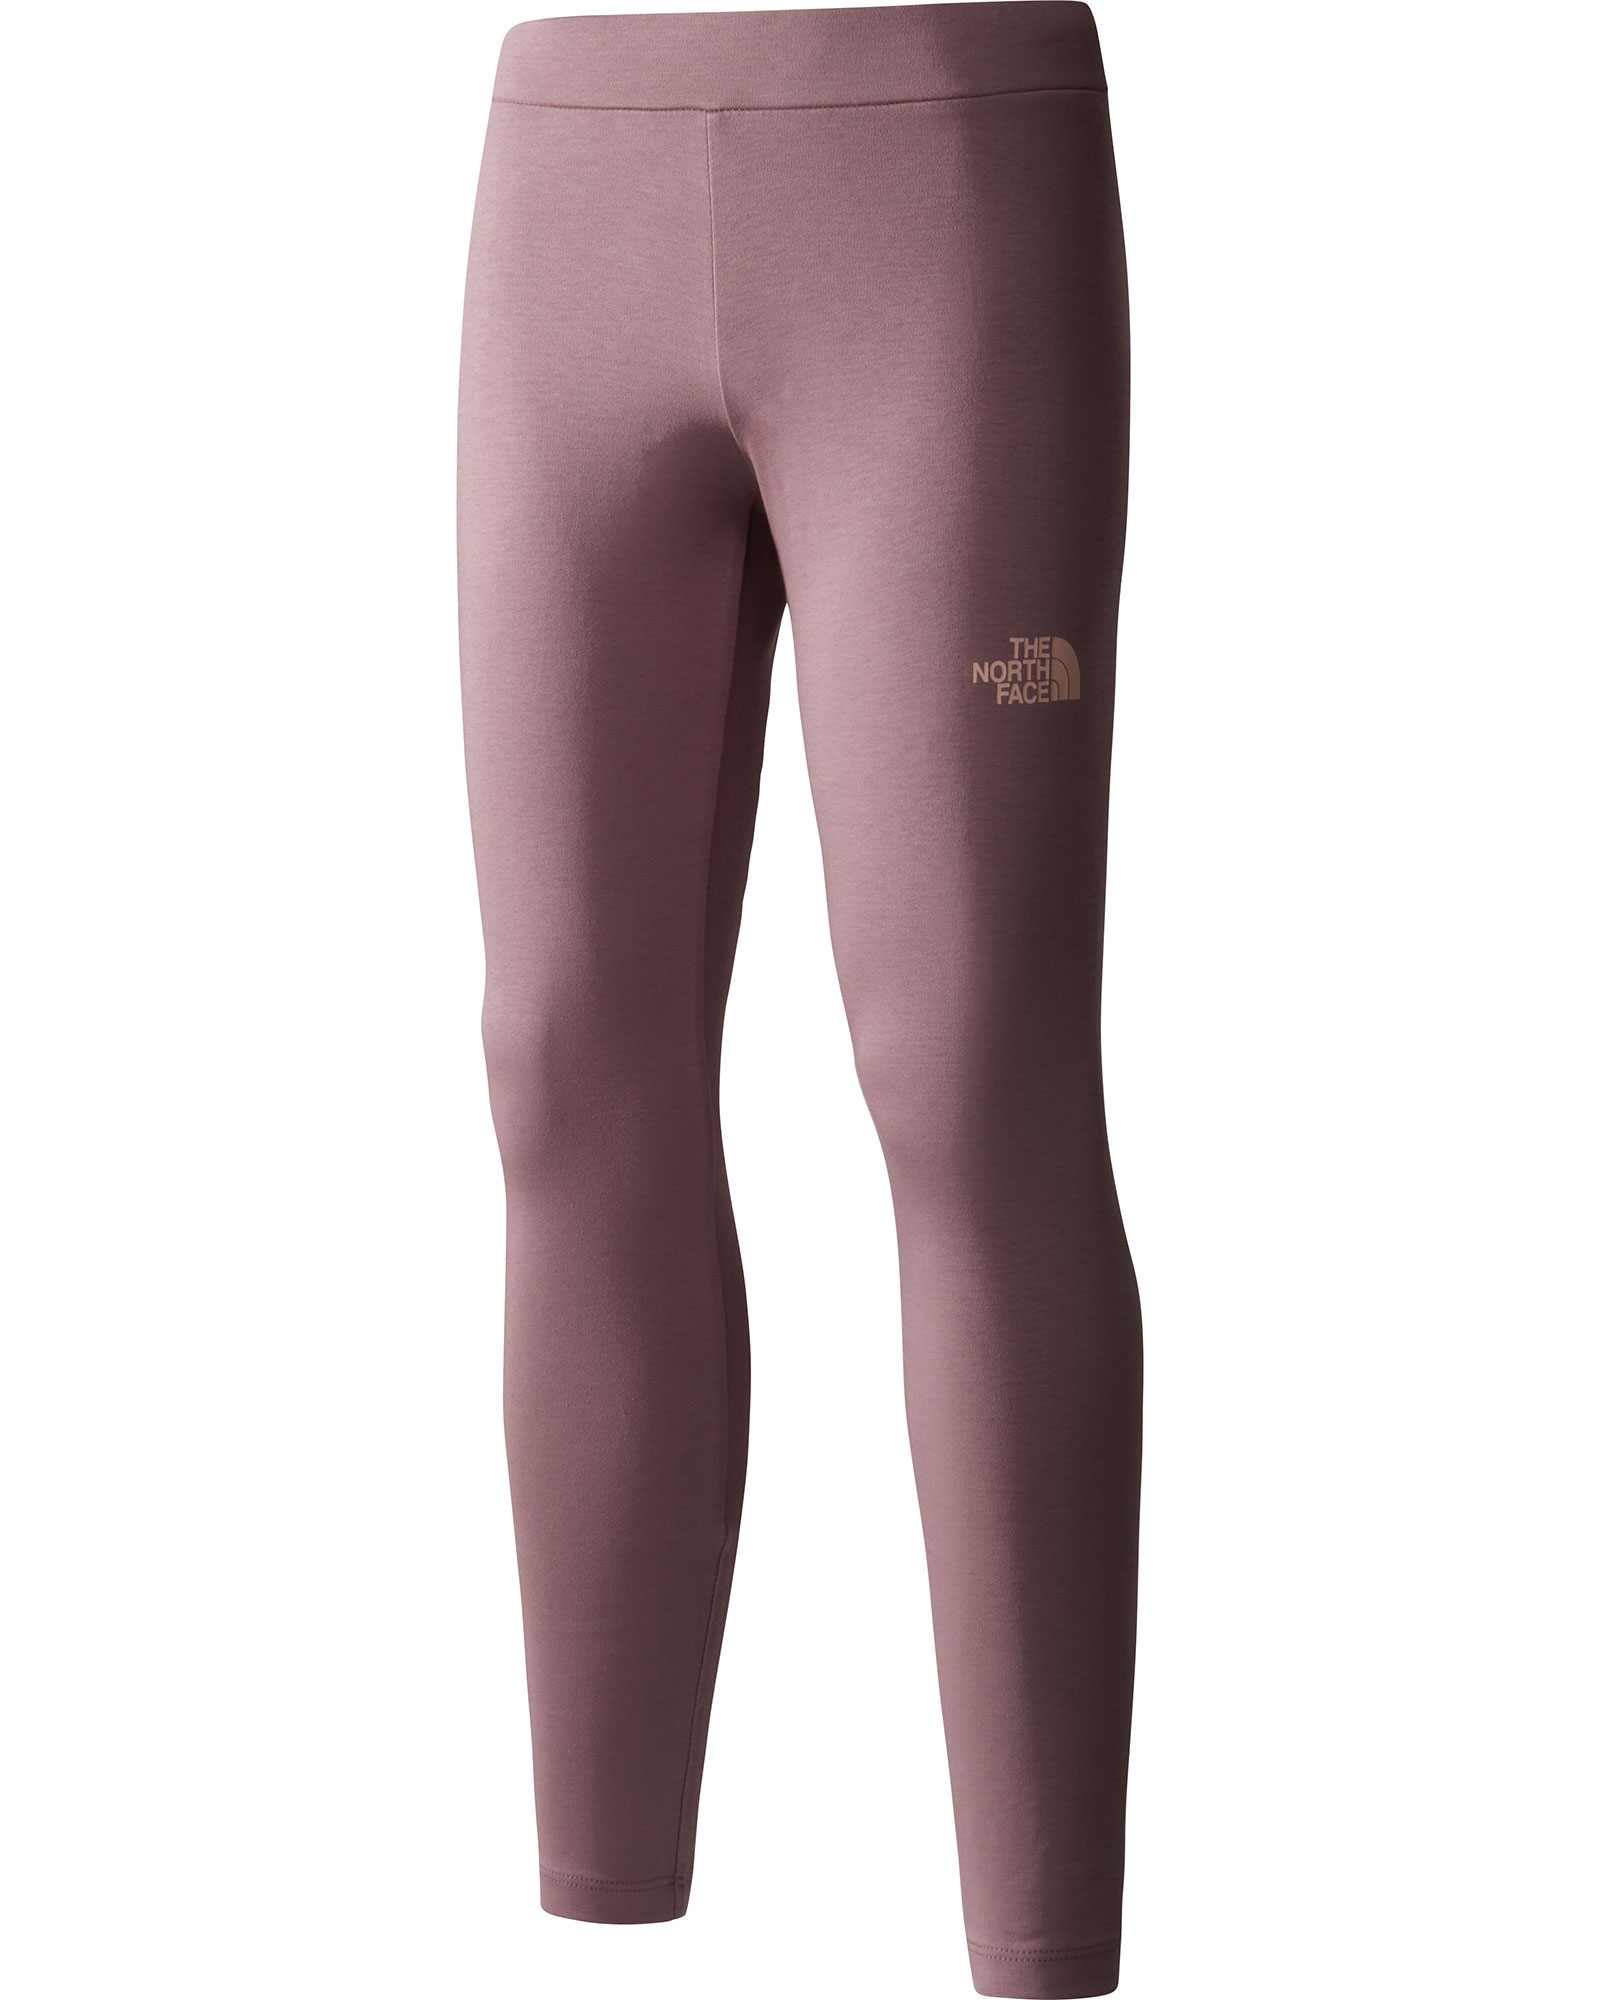 The North Face Girl’s Graphic Leggings - Fawn Grey XL